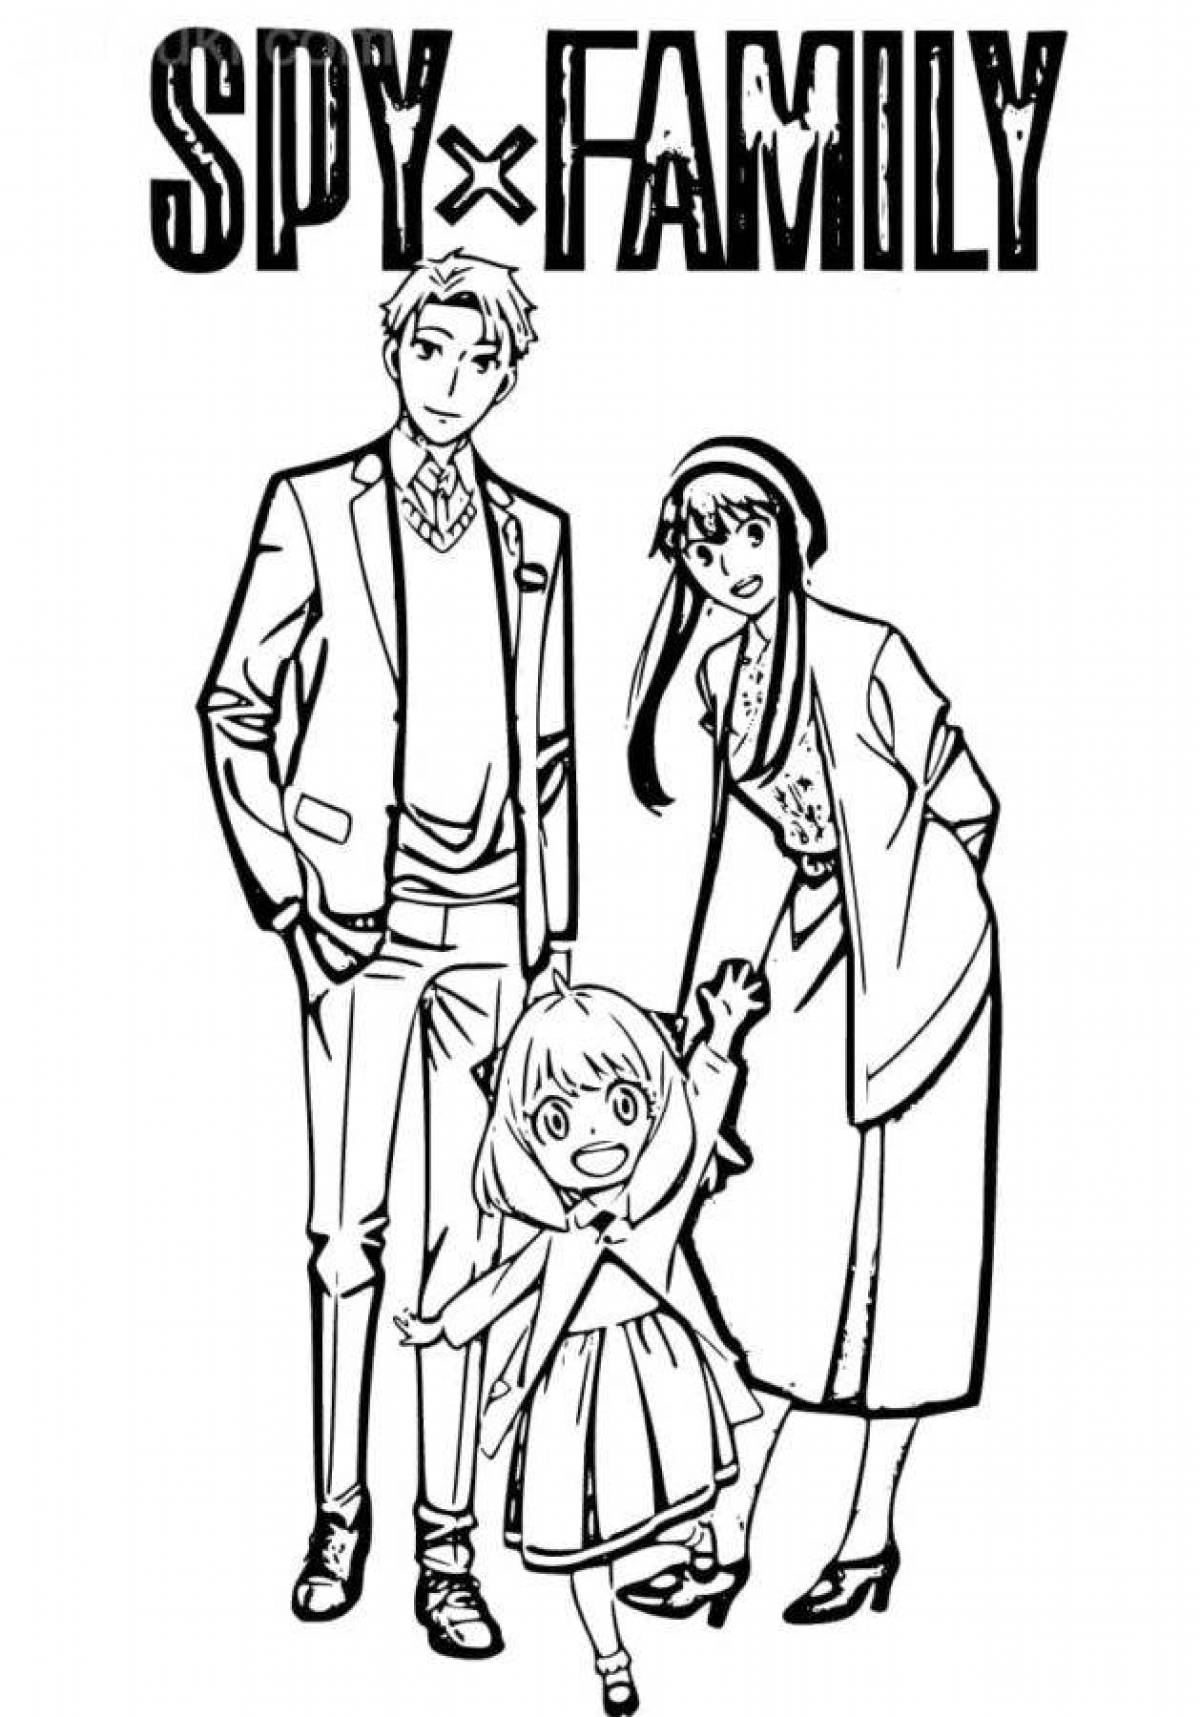 Coloring page bizarre spy family